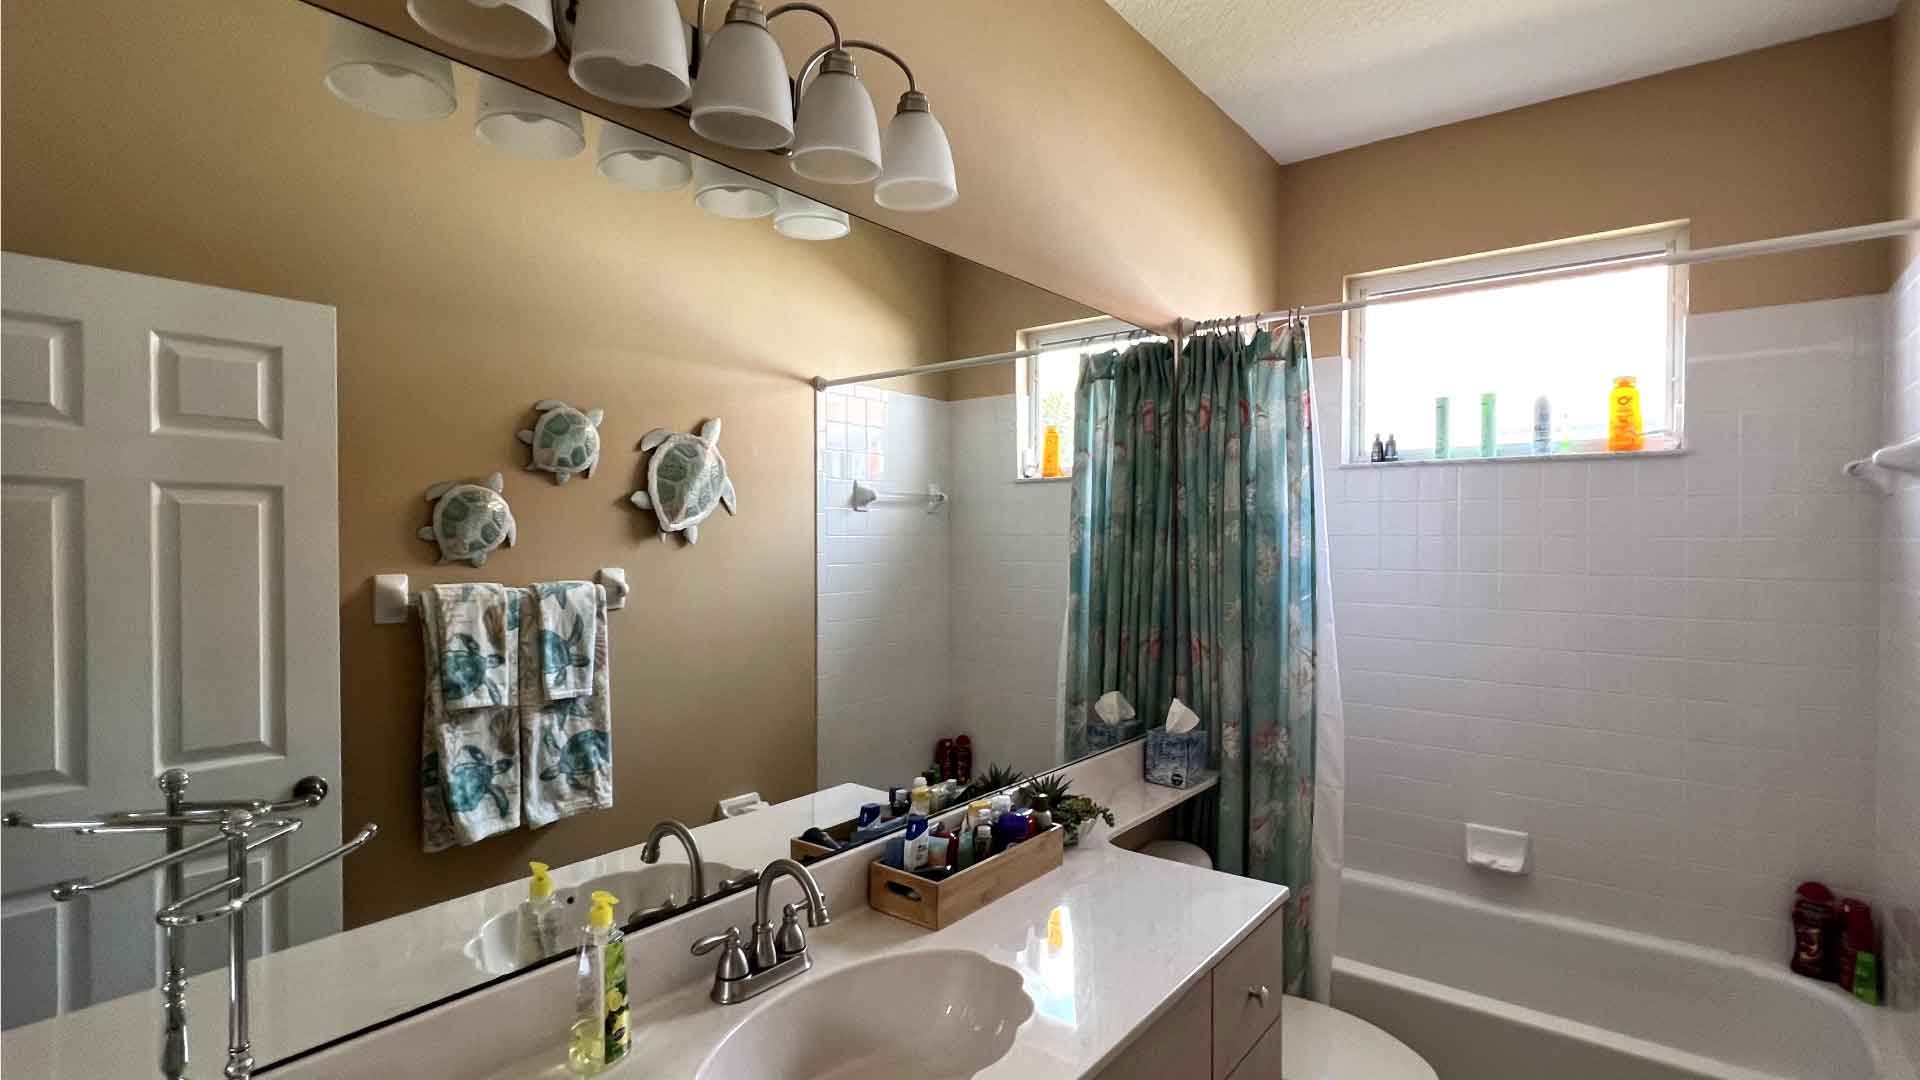 Bathroom cleaning - Deep cleaning in Cape Coral by Goldmillio - Feb 19